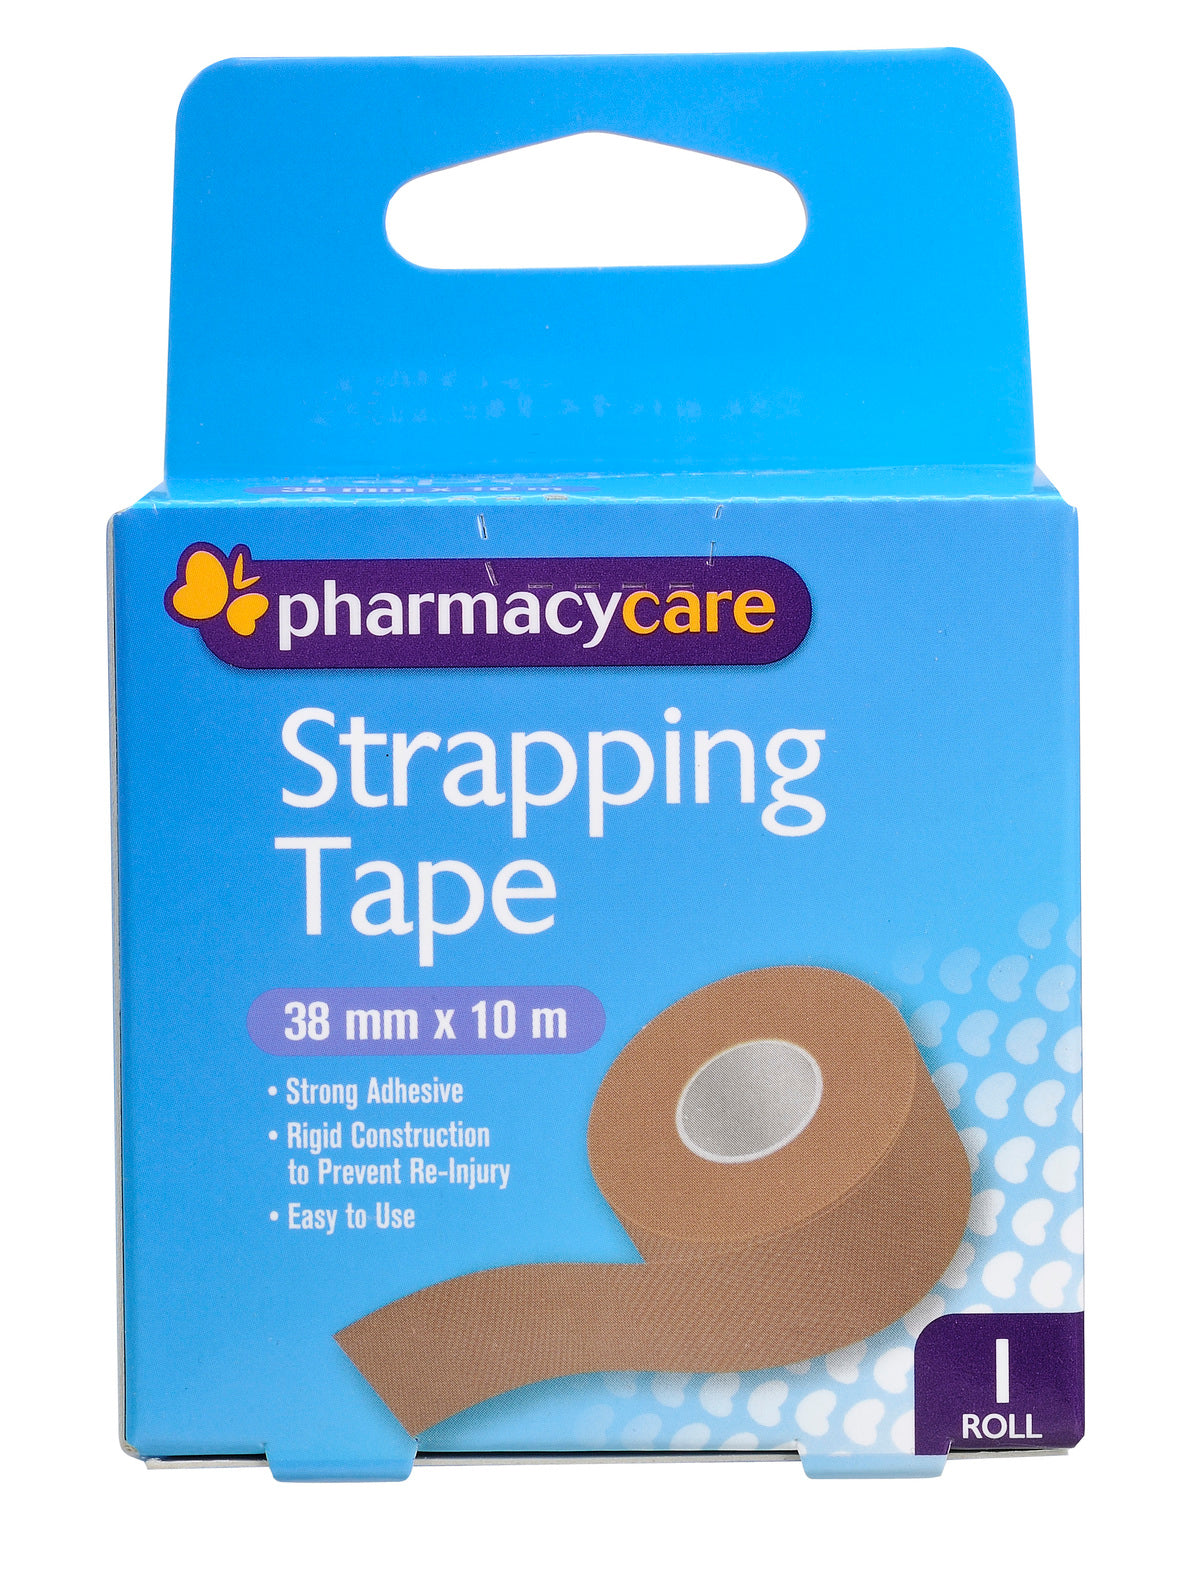 Pharmacy Care Strapping Tape 38mmx10m